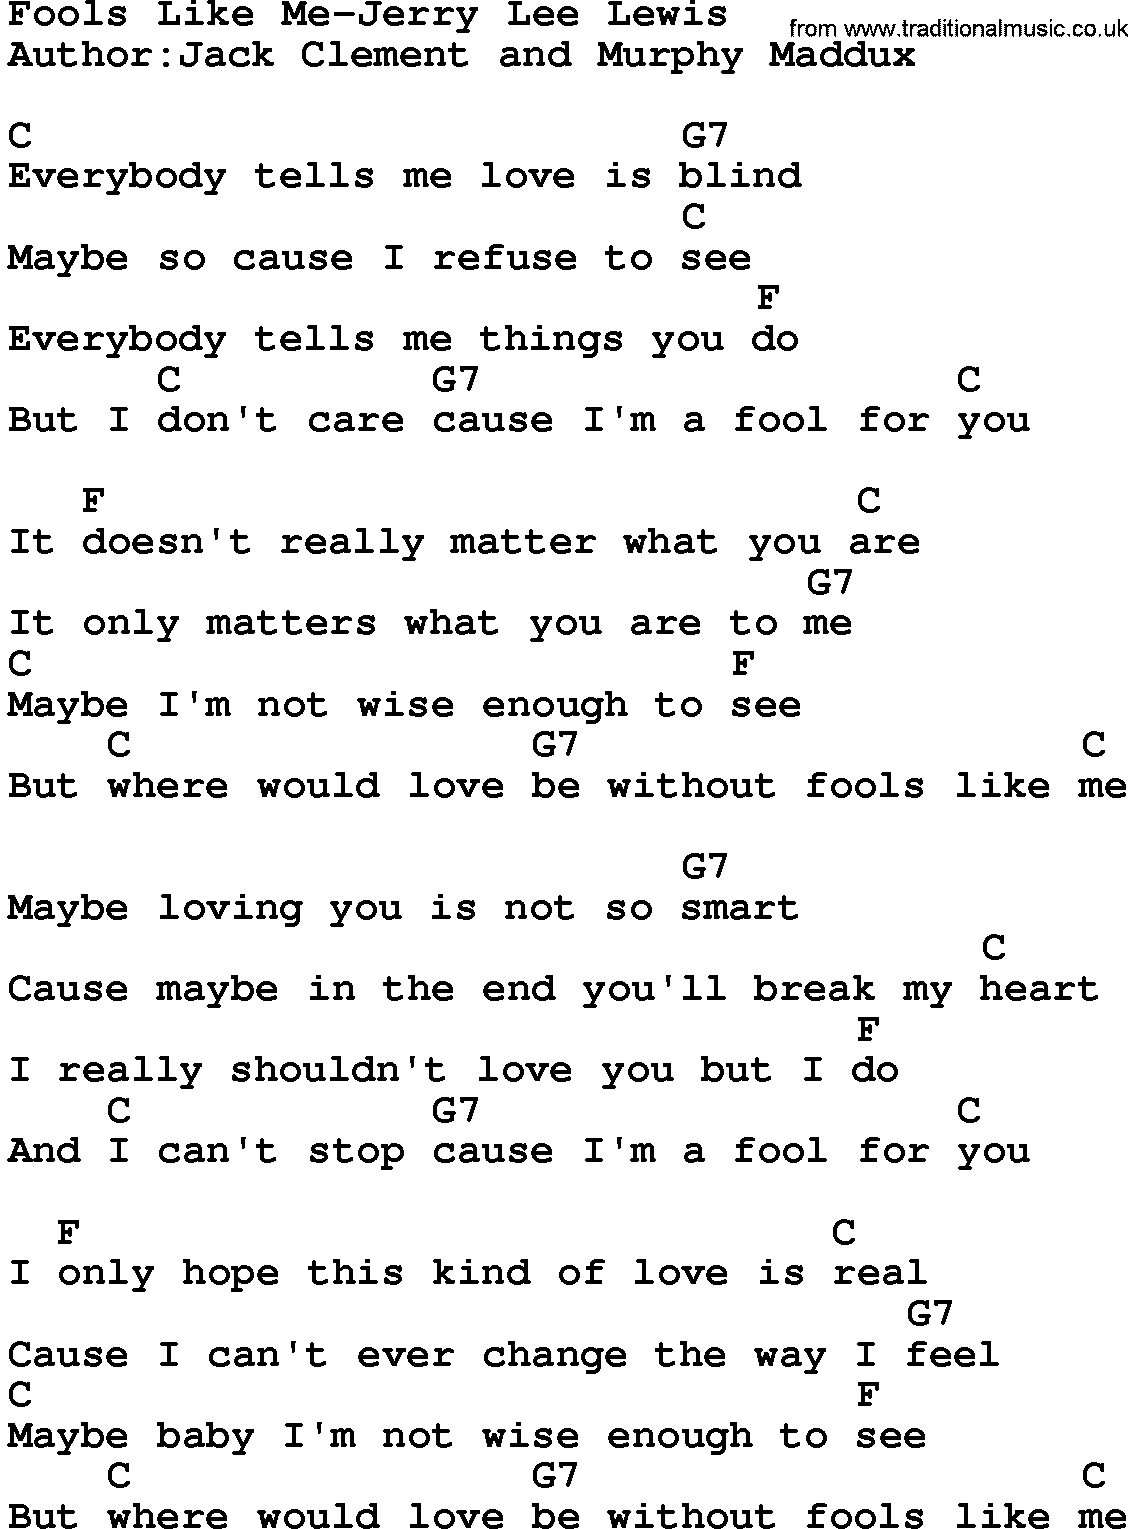 Country music song: Fools Like Me-Jerry Lee Lewis lyrics and chords